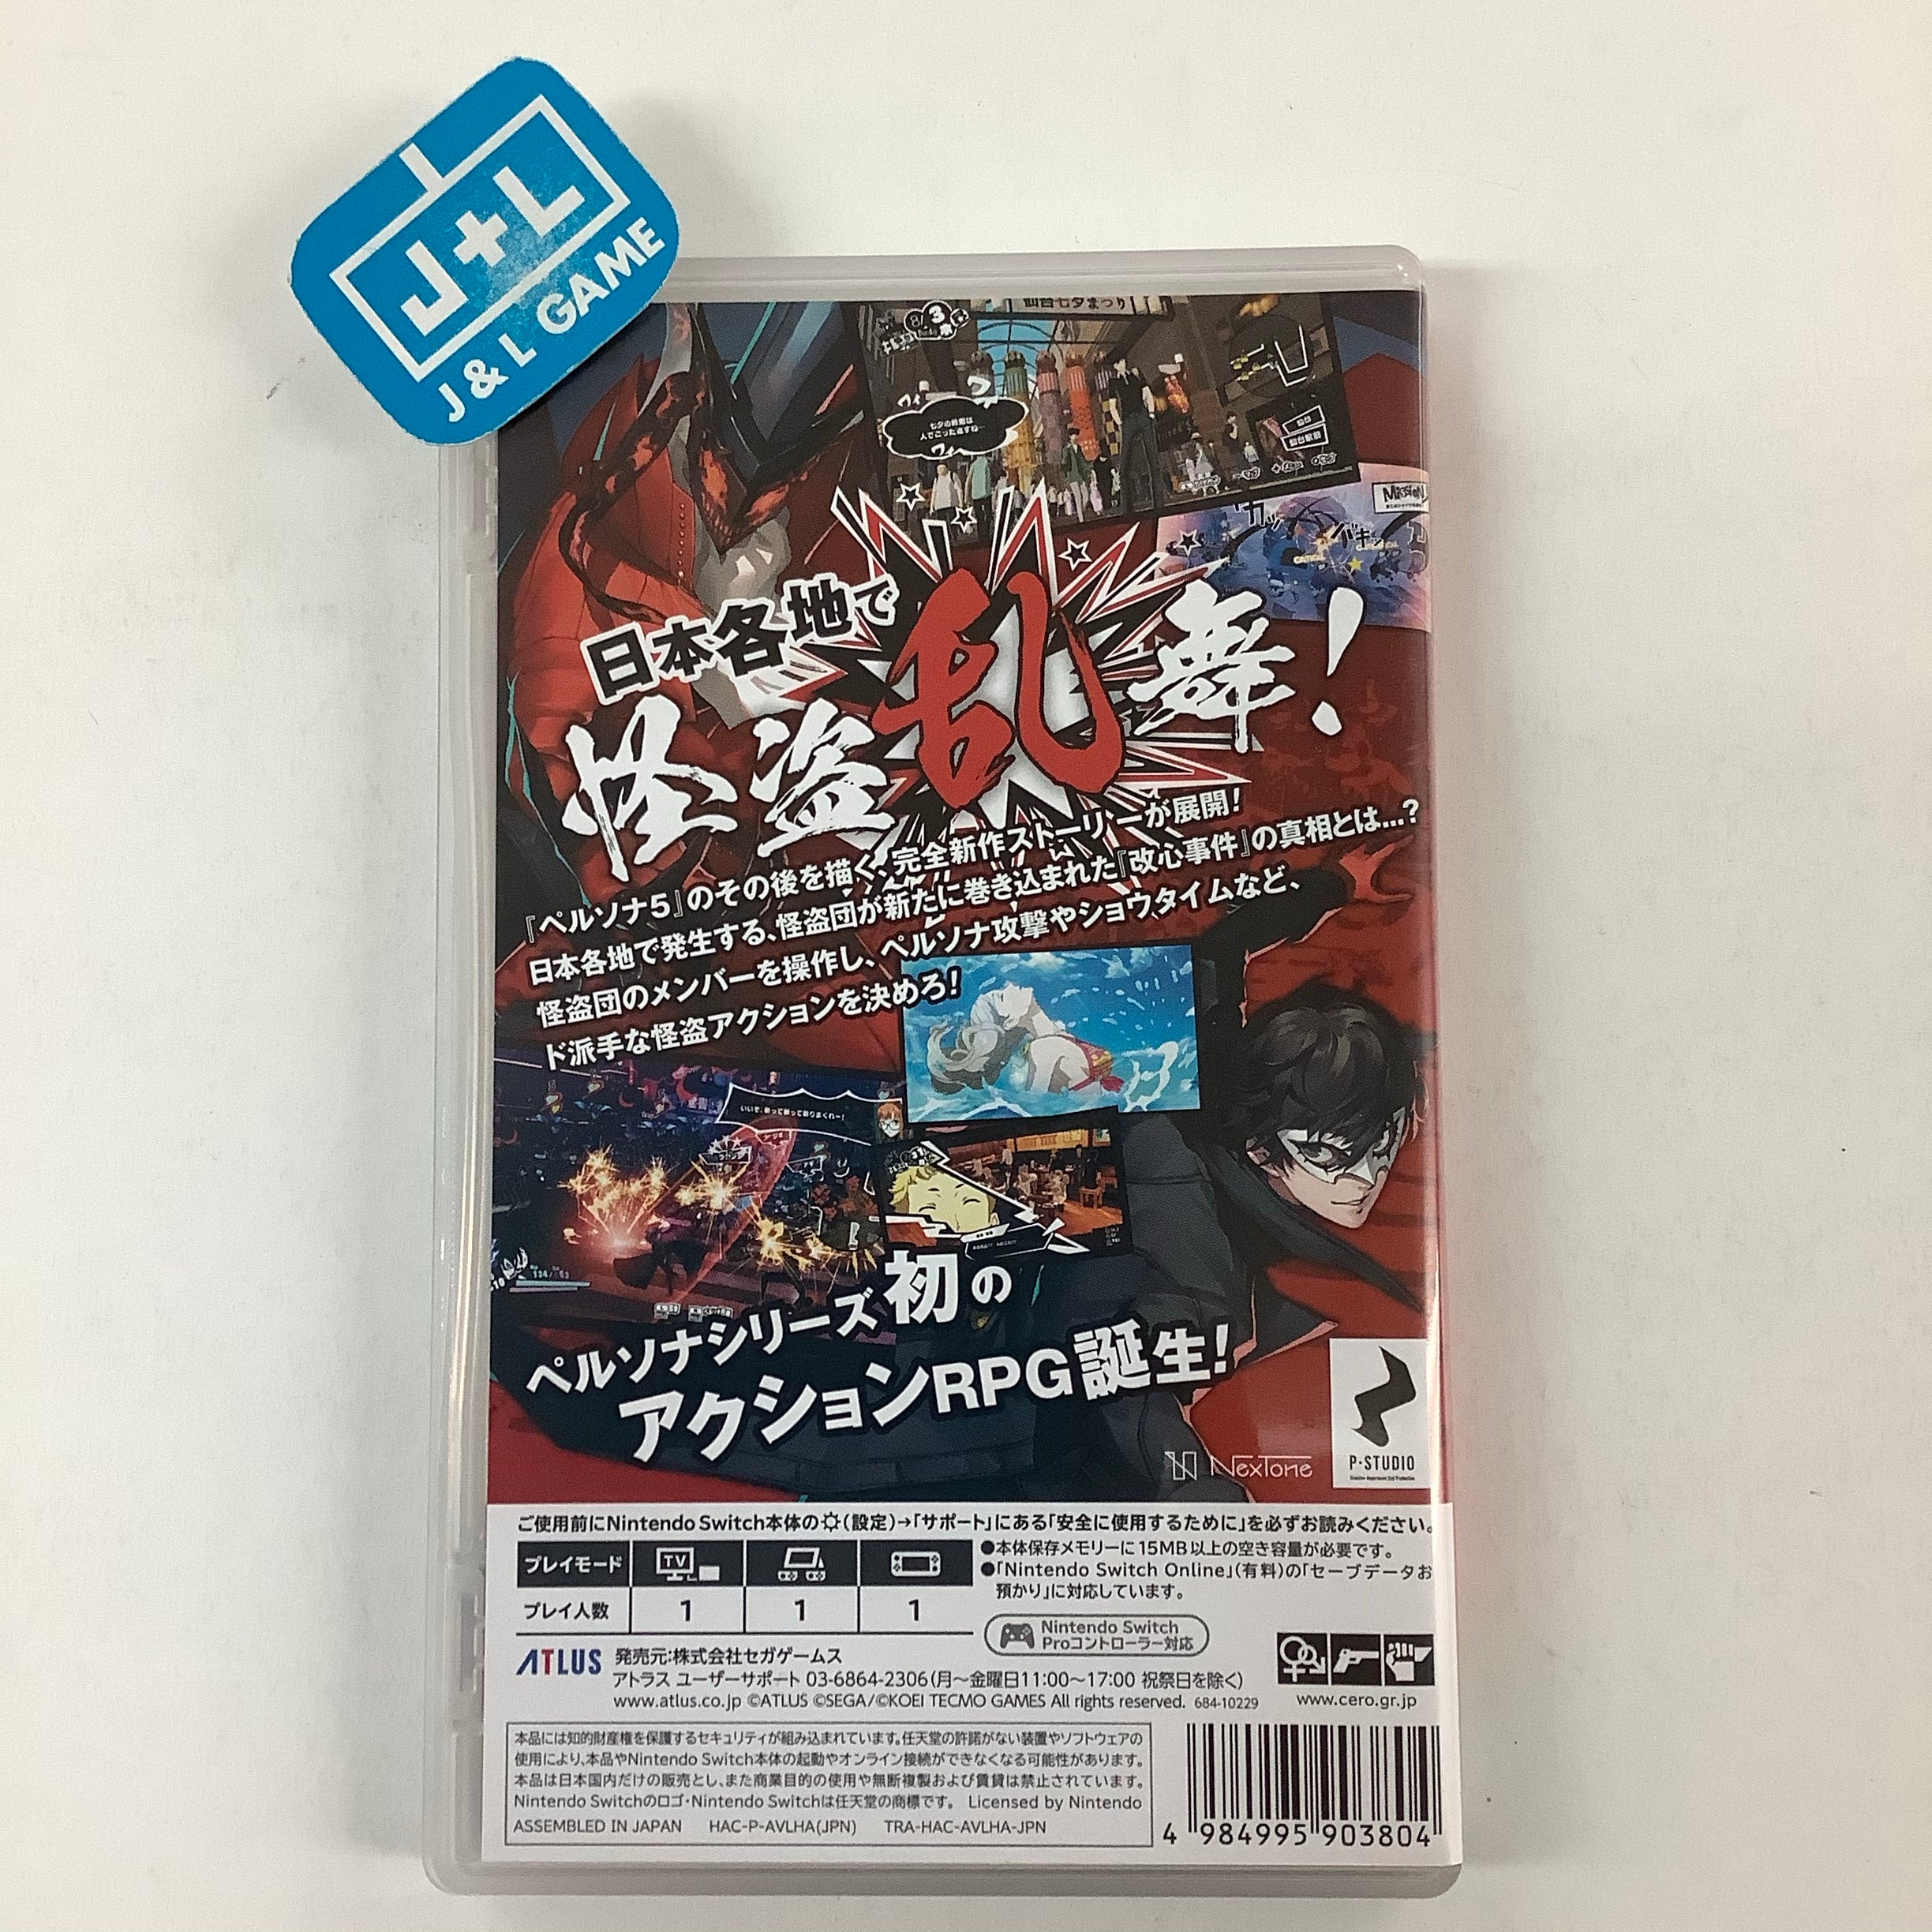 Persona 5 Strikers - (NSW) Nintendo Switch [Pre-Owned] (Japanese Import) Video Games Atlus   